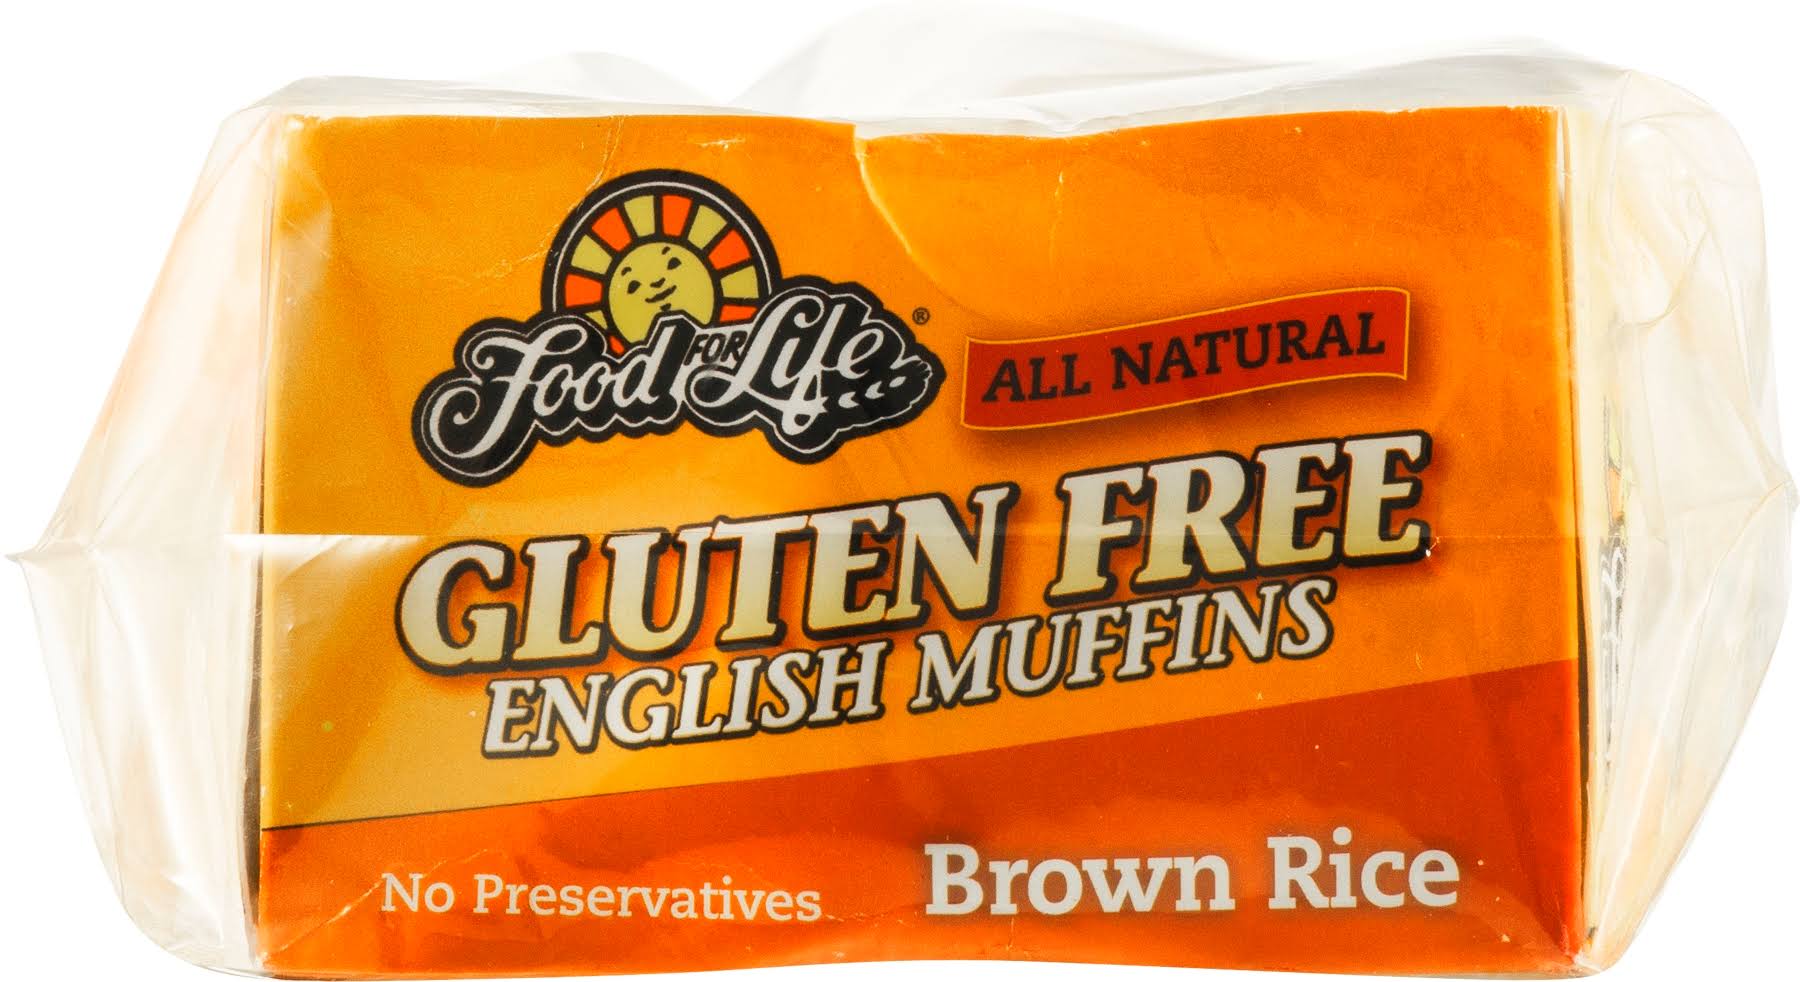 Food For Life English Muffins, Brown Rice - 6 muffins, 18 oz